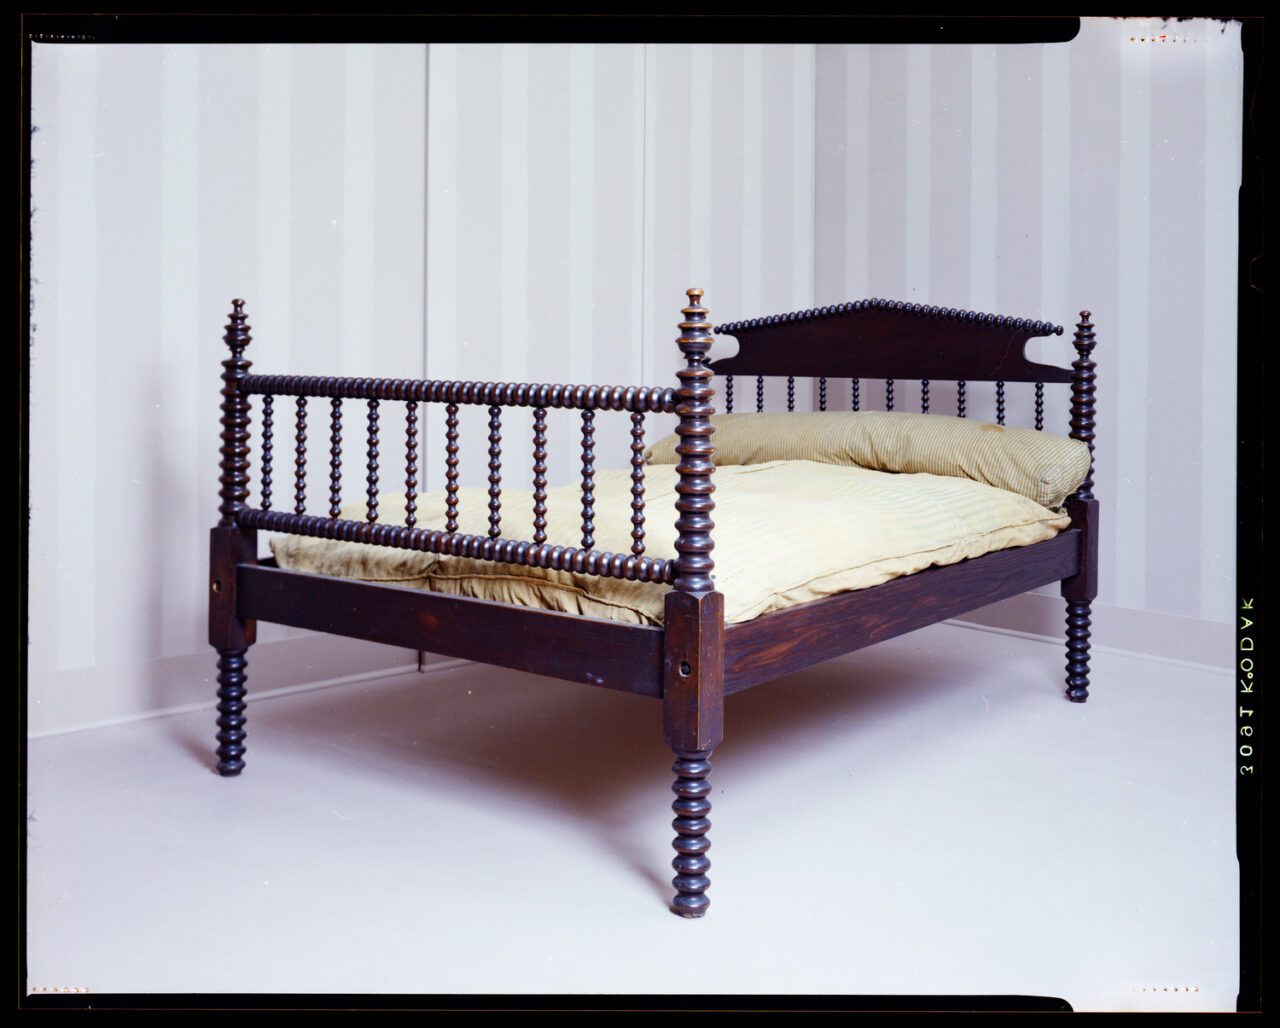 Bed on which Abraham Lincoln died